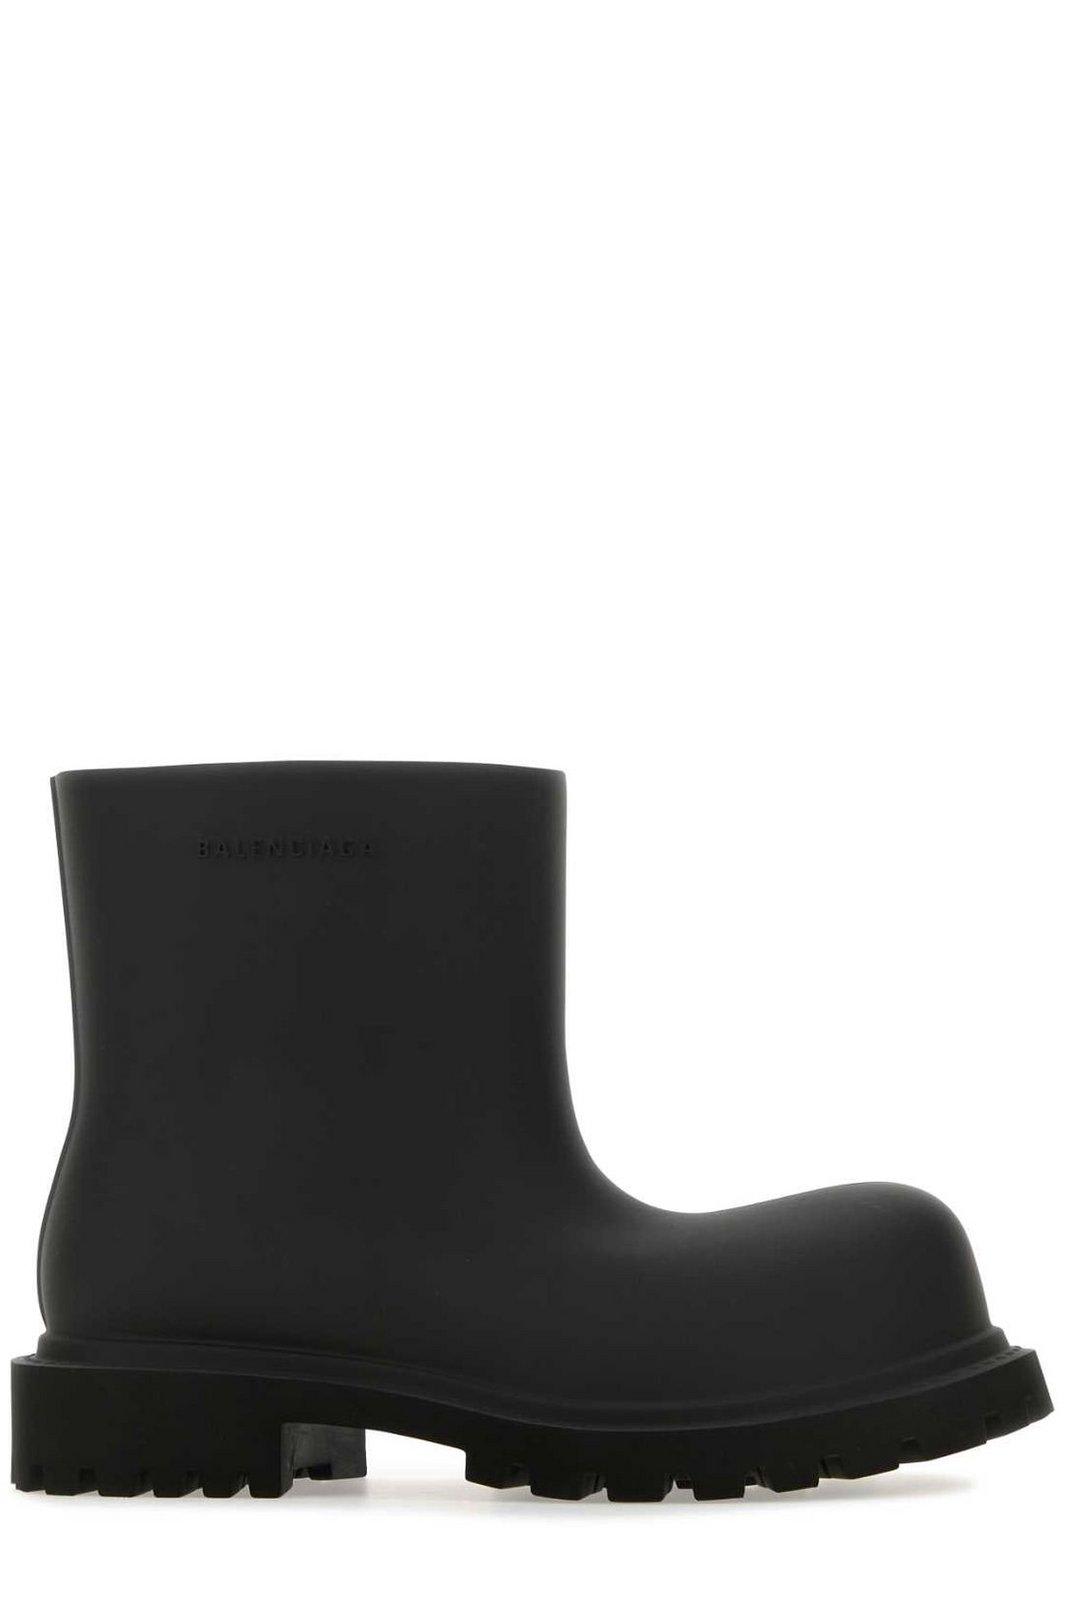 Steroid Ankle Boots